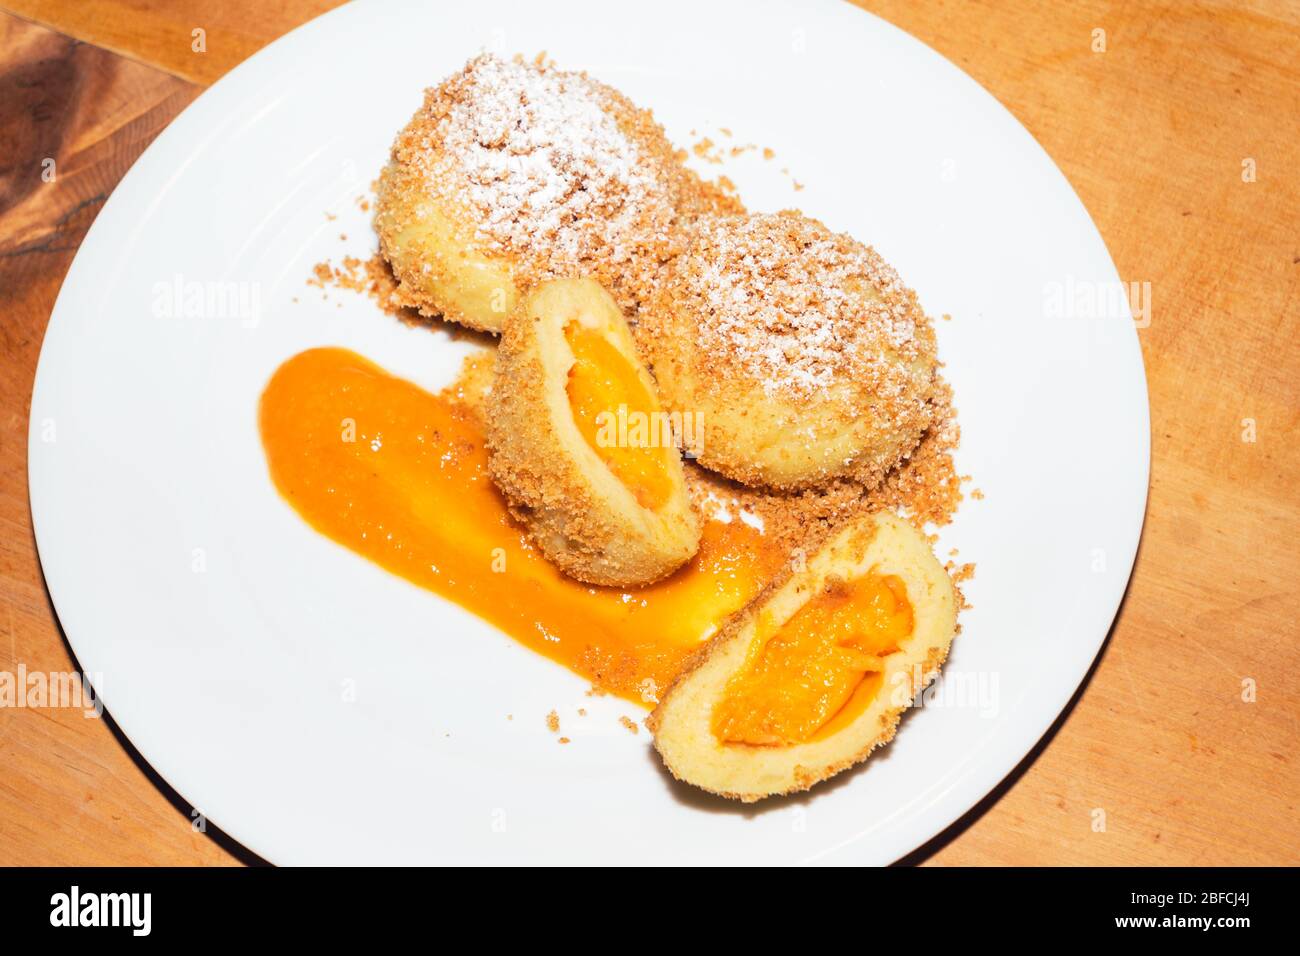 Sweet Apricot Dumplings with Buttered Breadcrumbs on a Plate, a Specialty of Traditional Austrian Cuisine Stock Photo